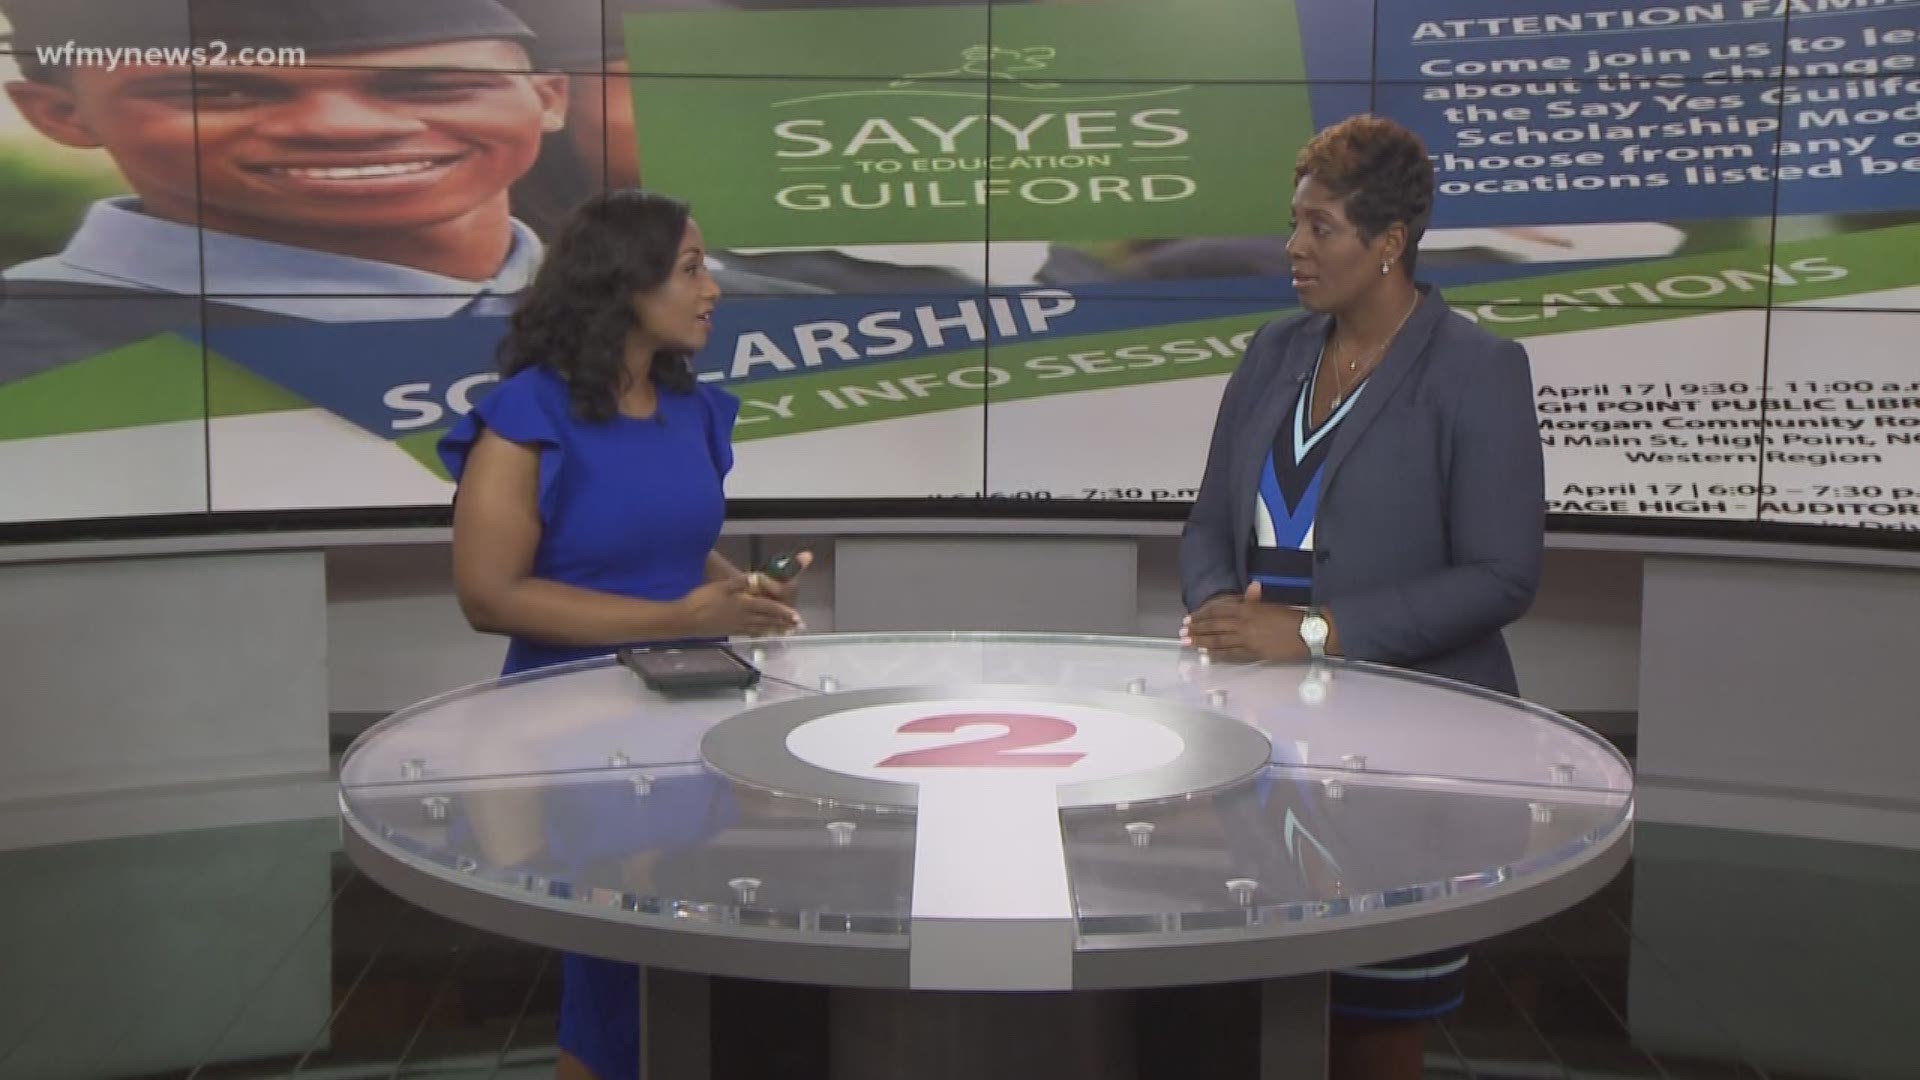 New Say Yes Guilford Chief Executive Officer Wendy Poteat talks about the future of the scholarship program for students.